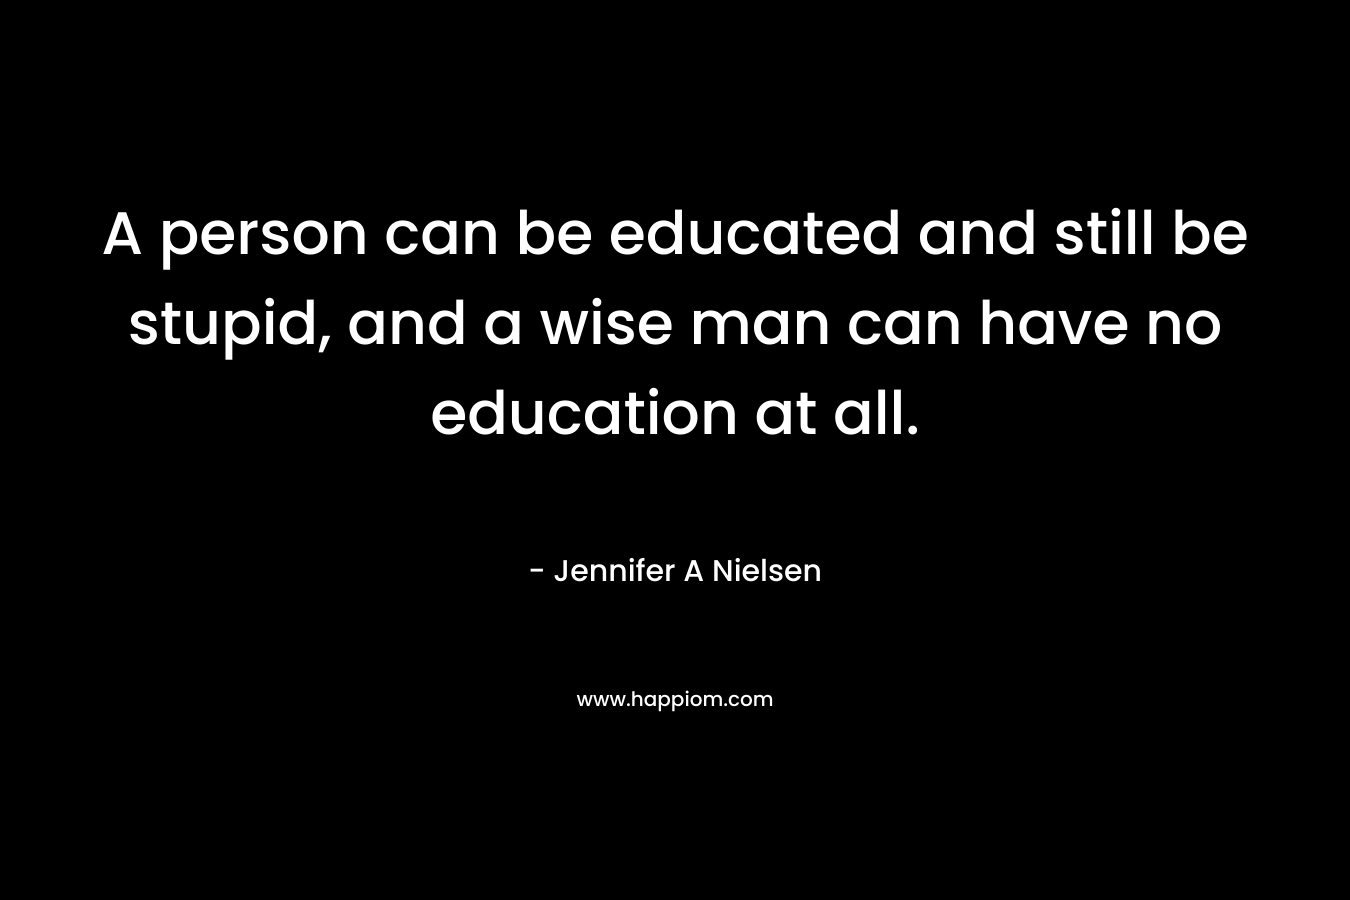 A person can be educated and still be stupid, and a wise man can have no education at all. – Jennifer A Nielsen